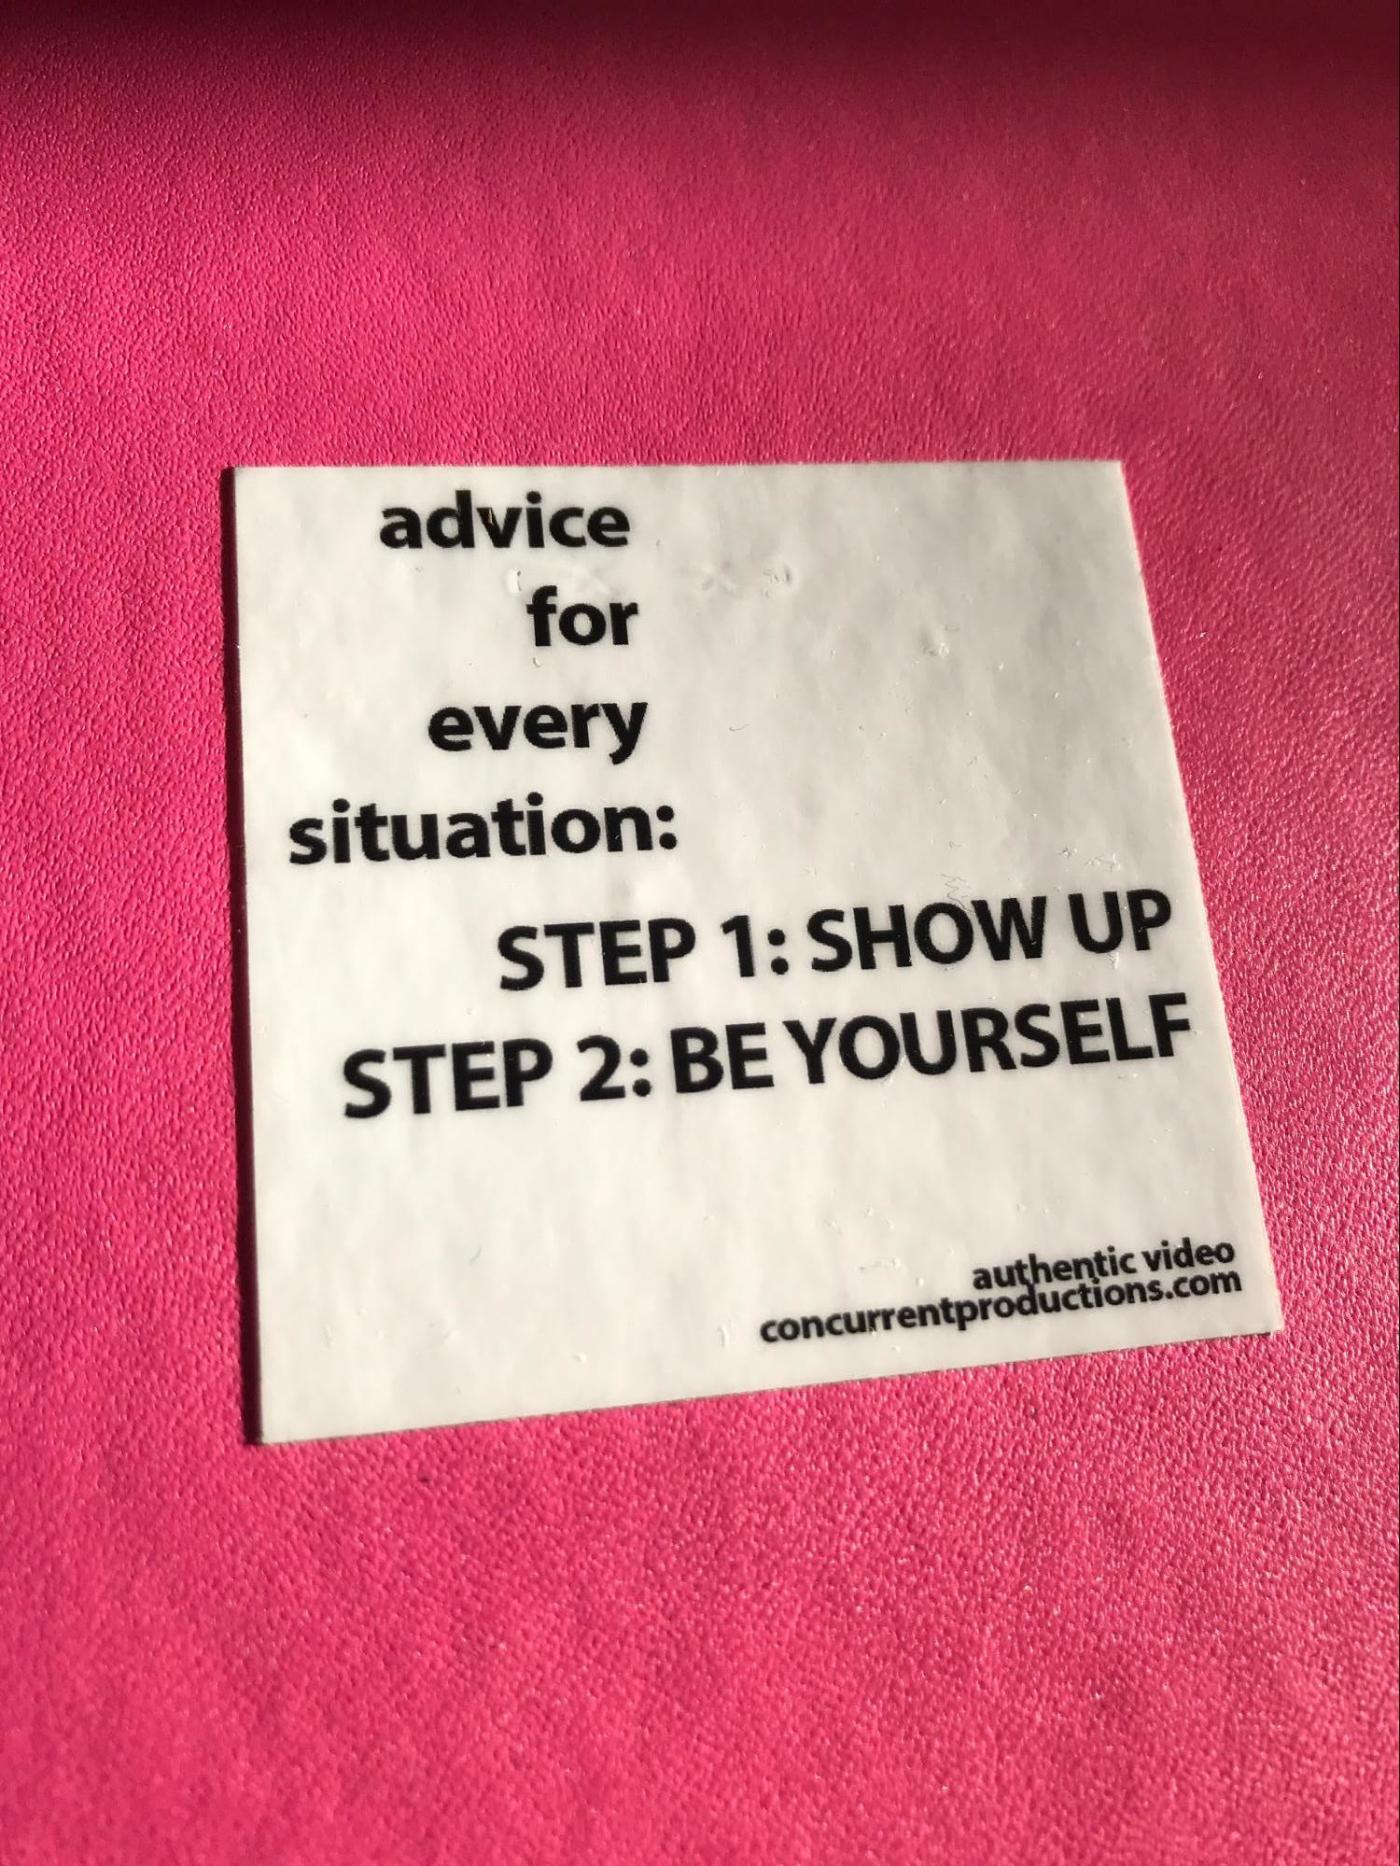 A motivational sticker that says Step 1: Show up Step 2: Be yourself